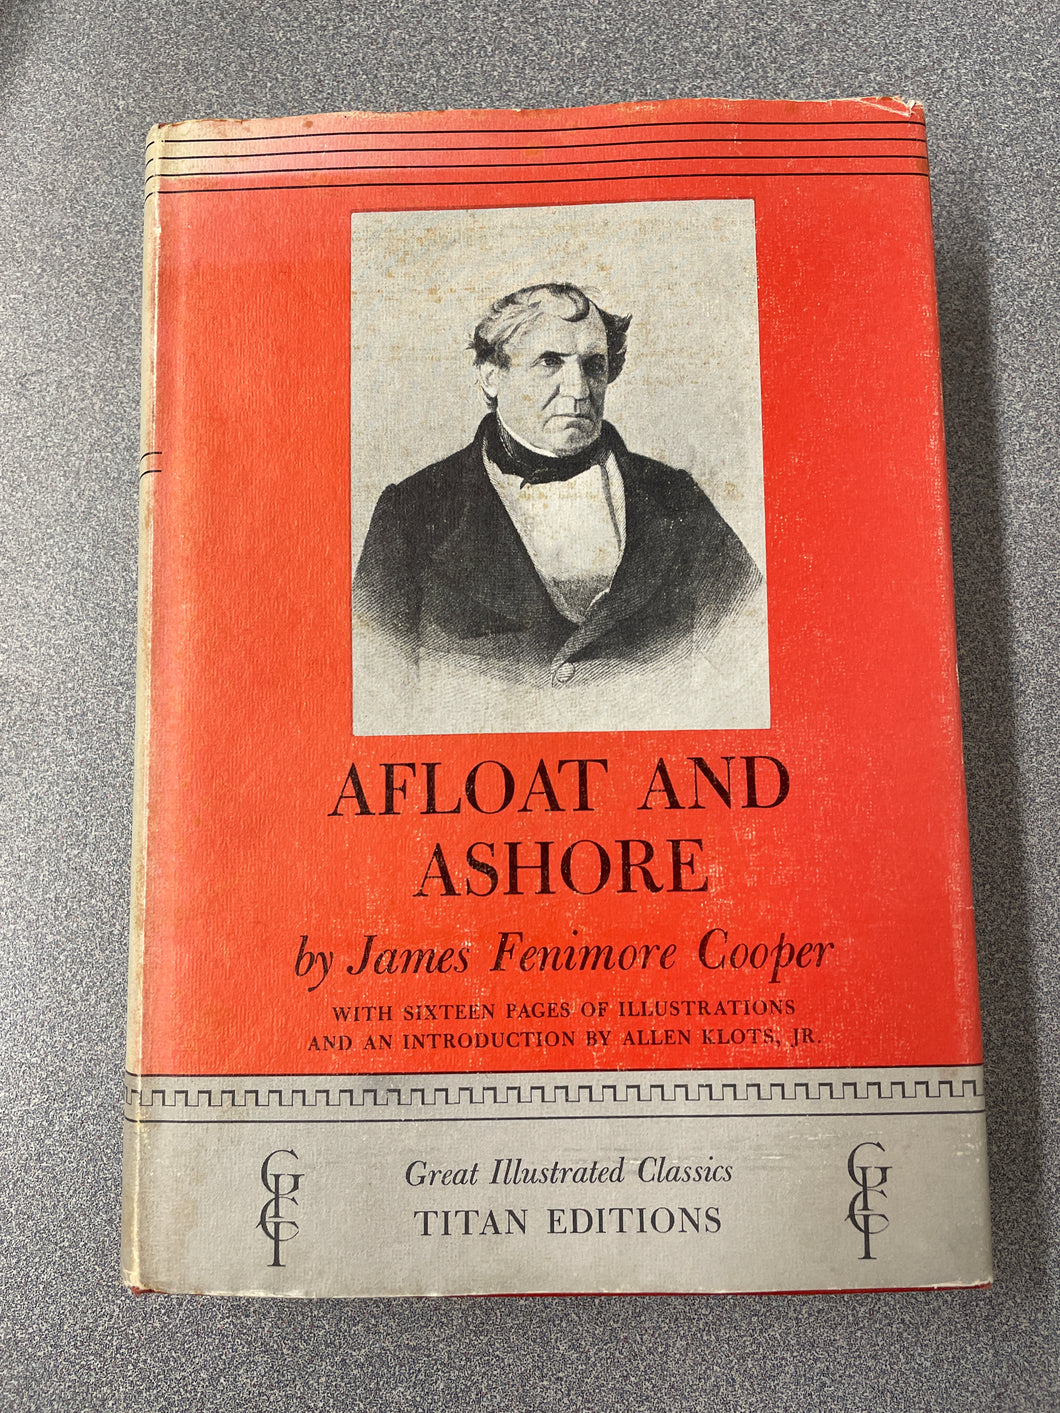 CL  Cooper, James Fenimore, Afloat and Ashore [1956] N 1/24